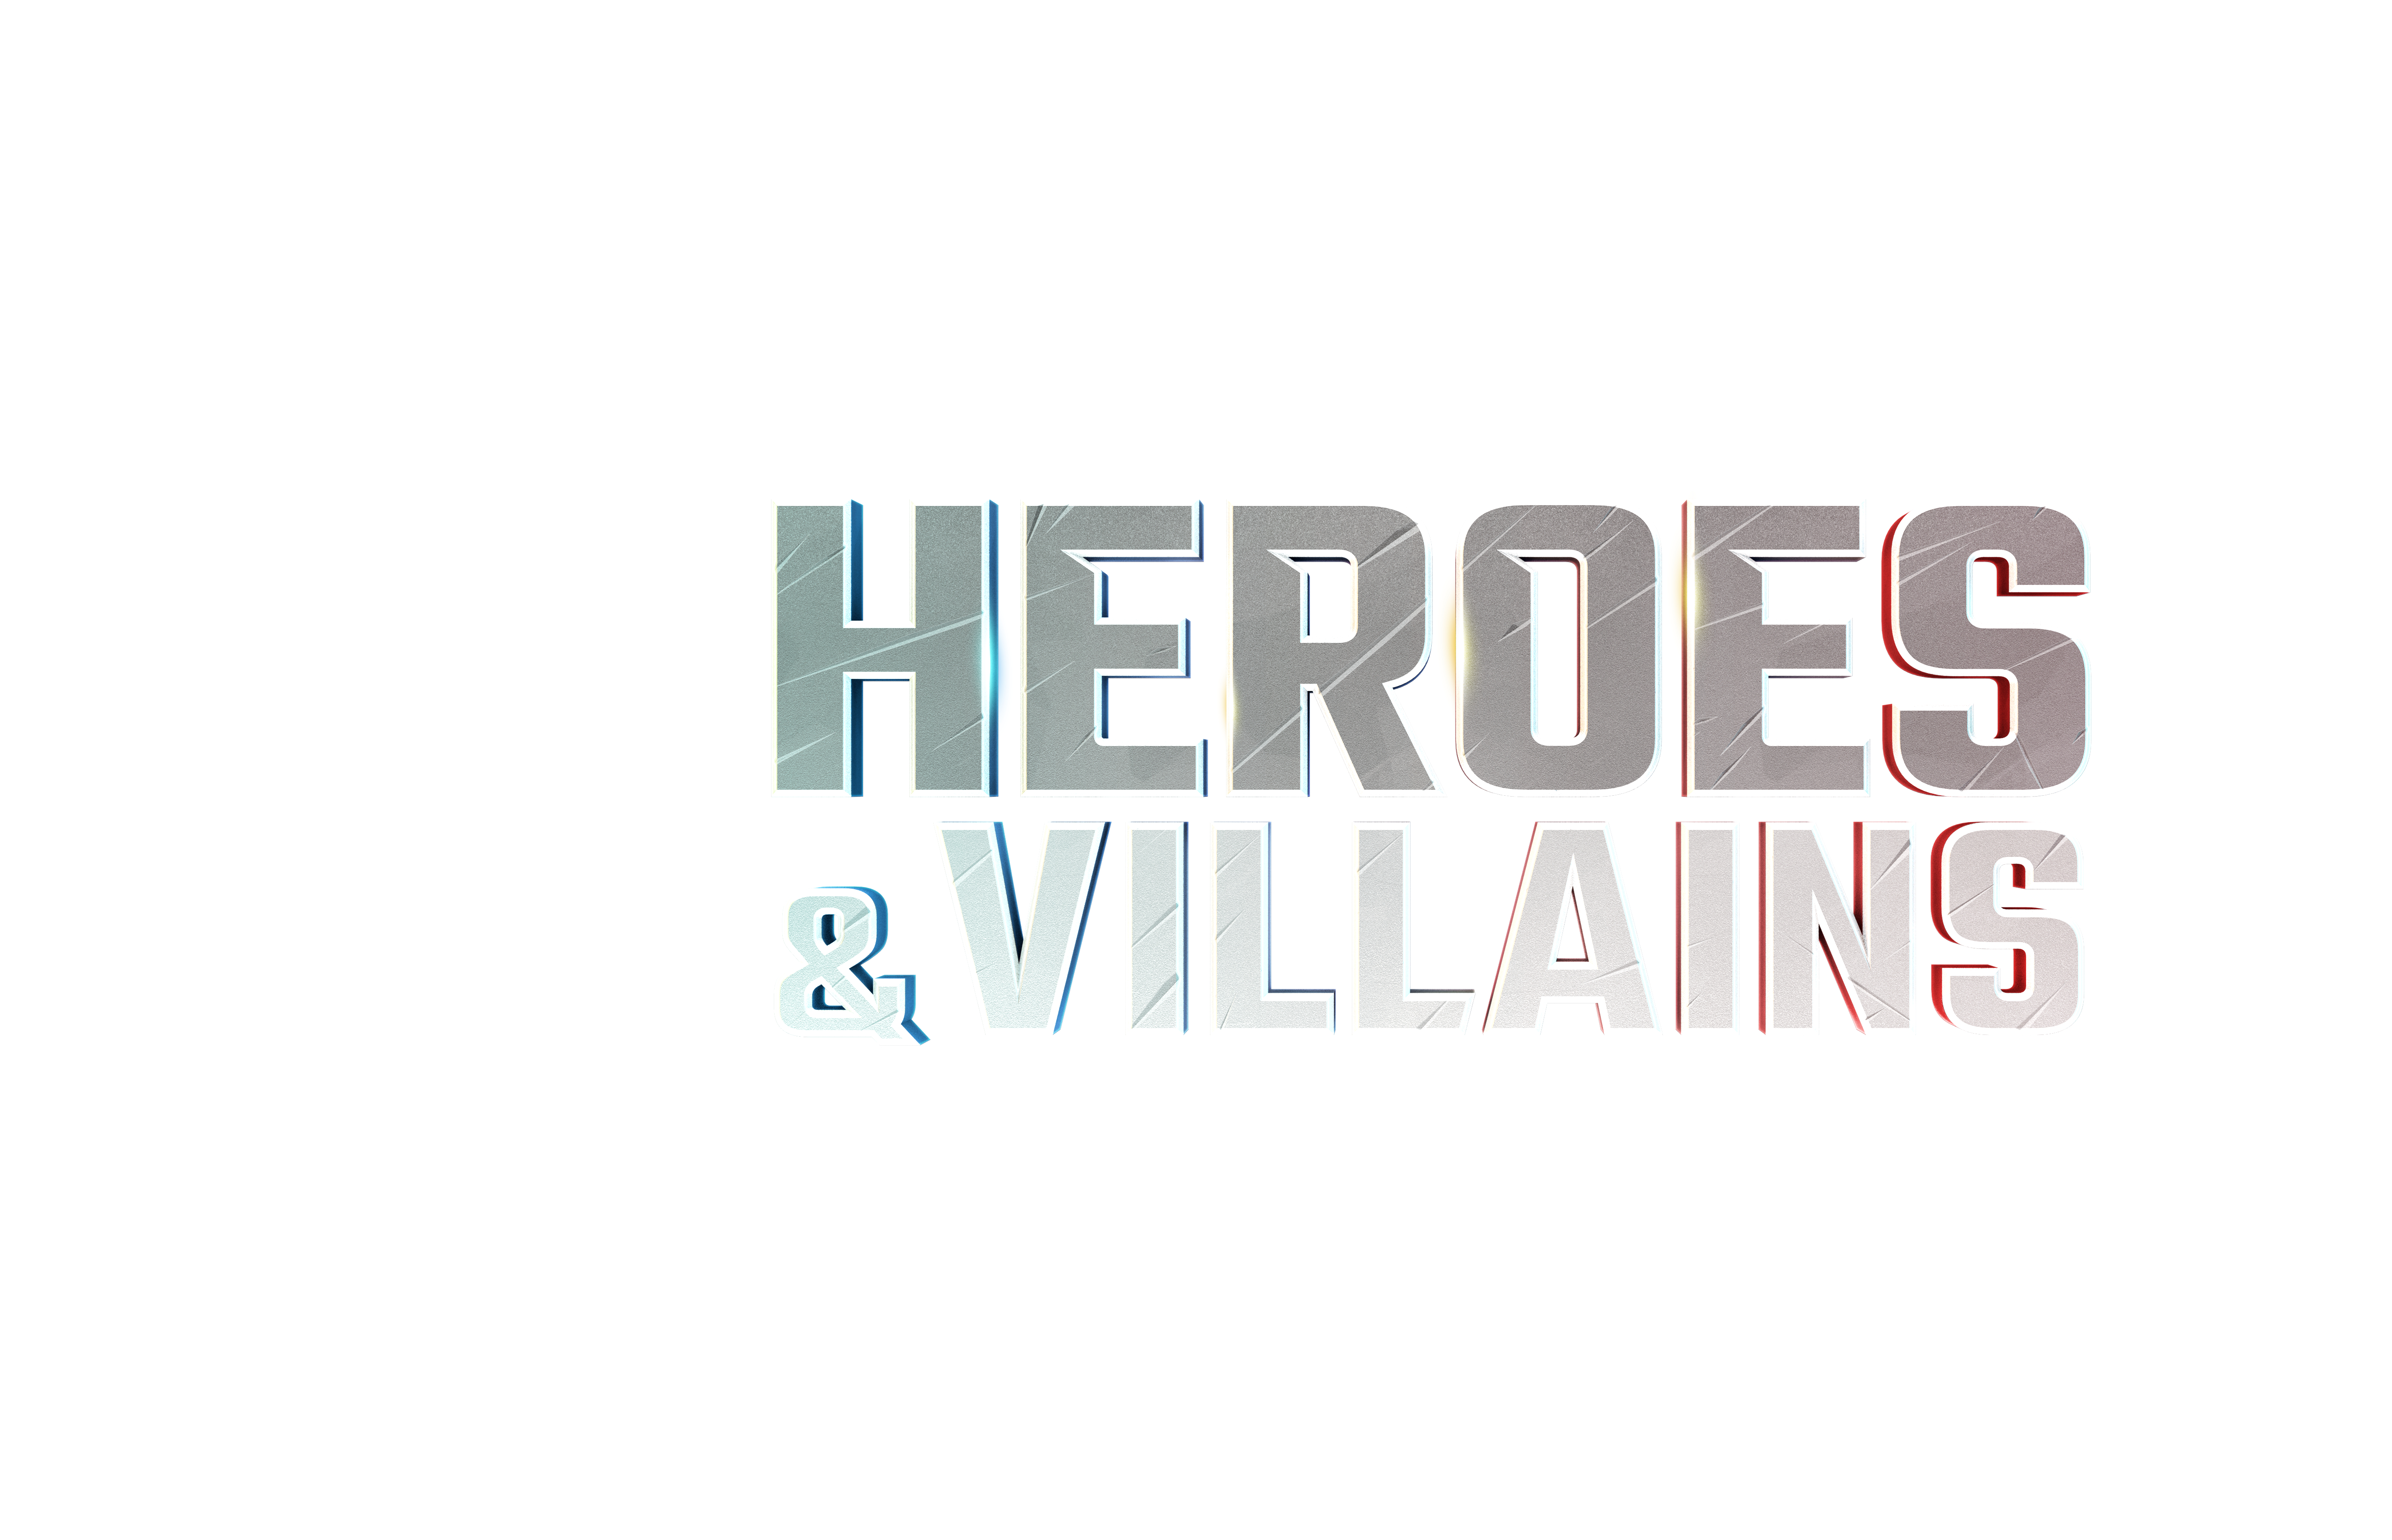 all heroes and villains